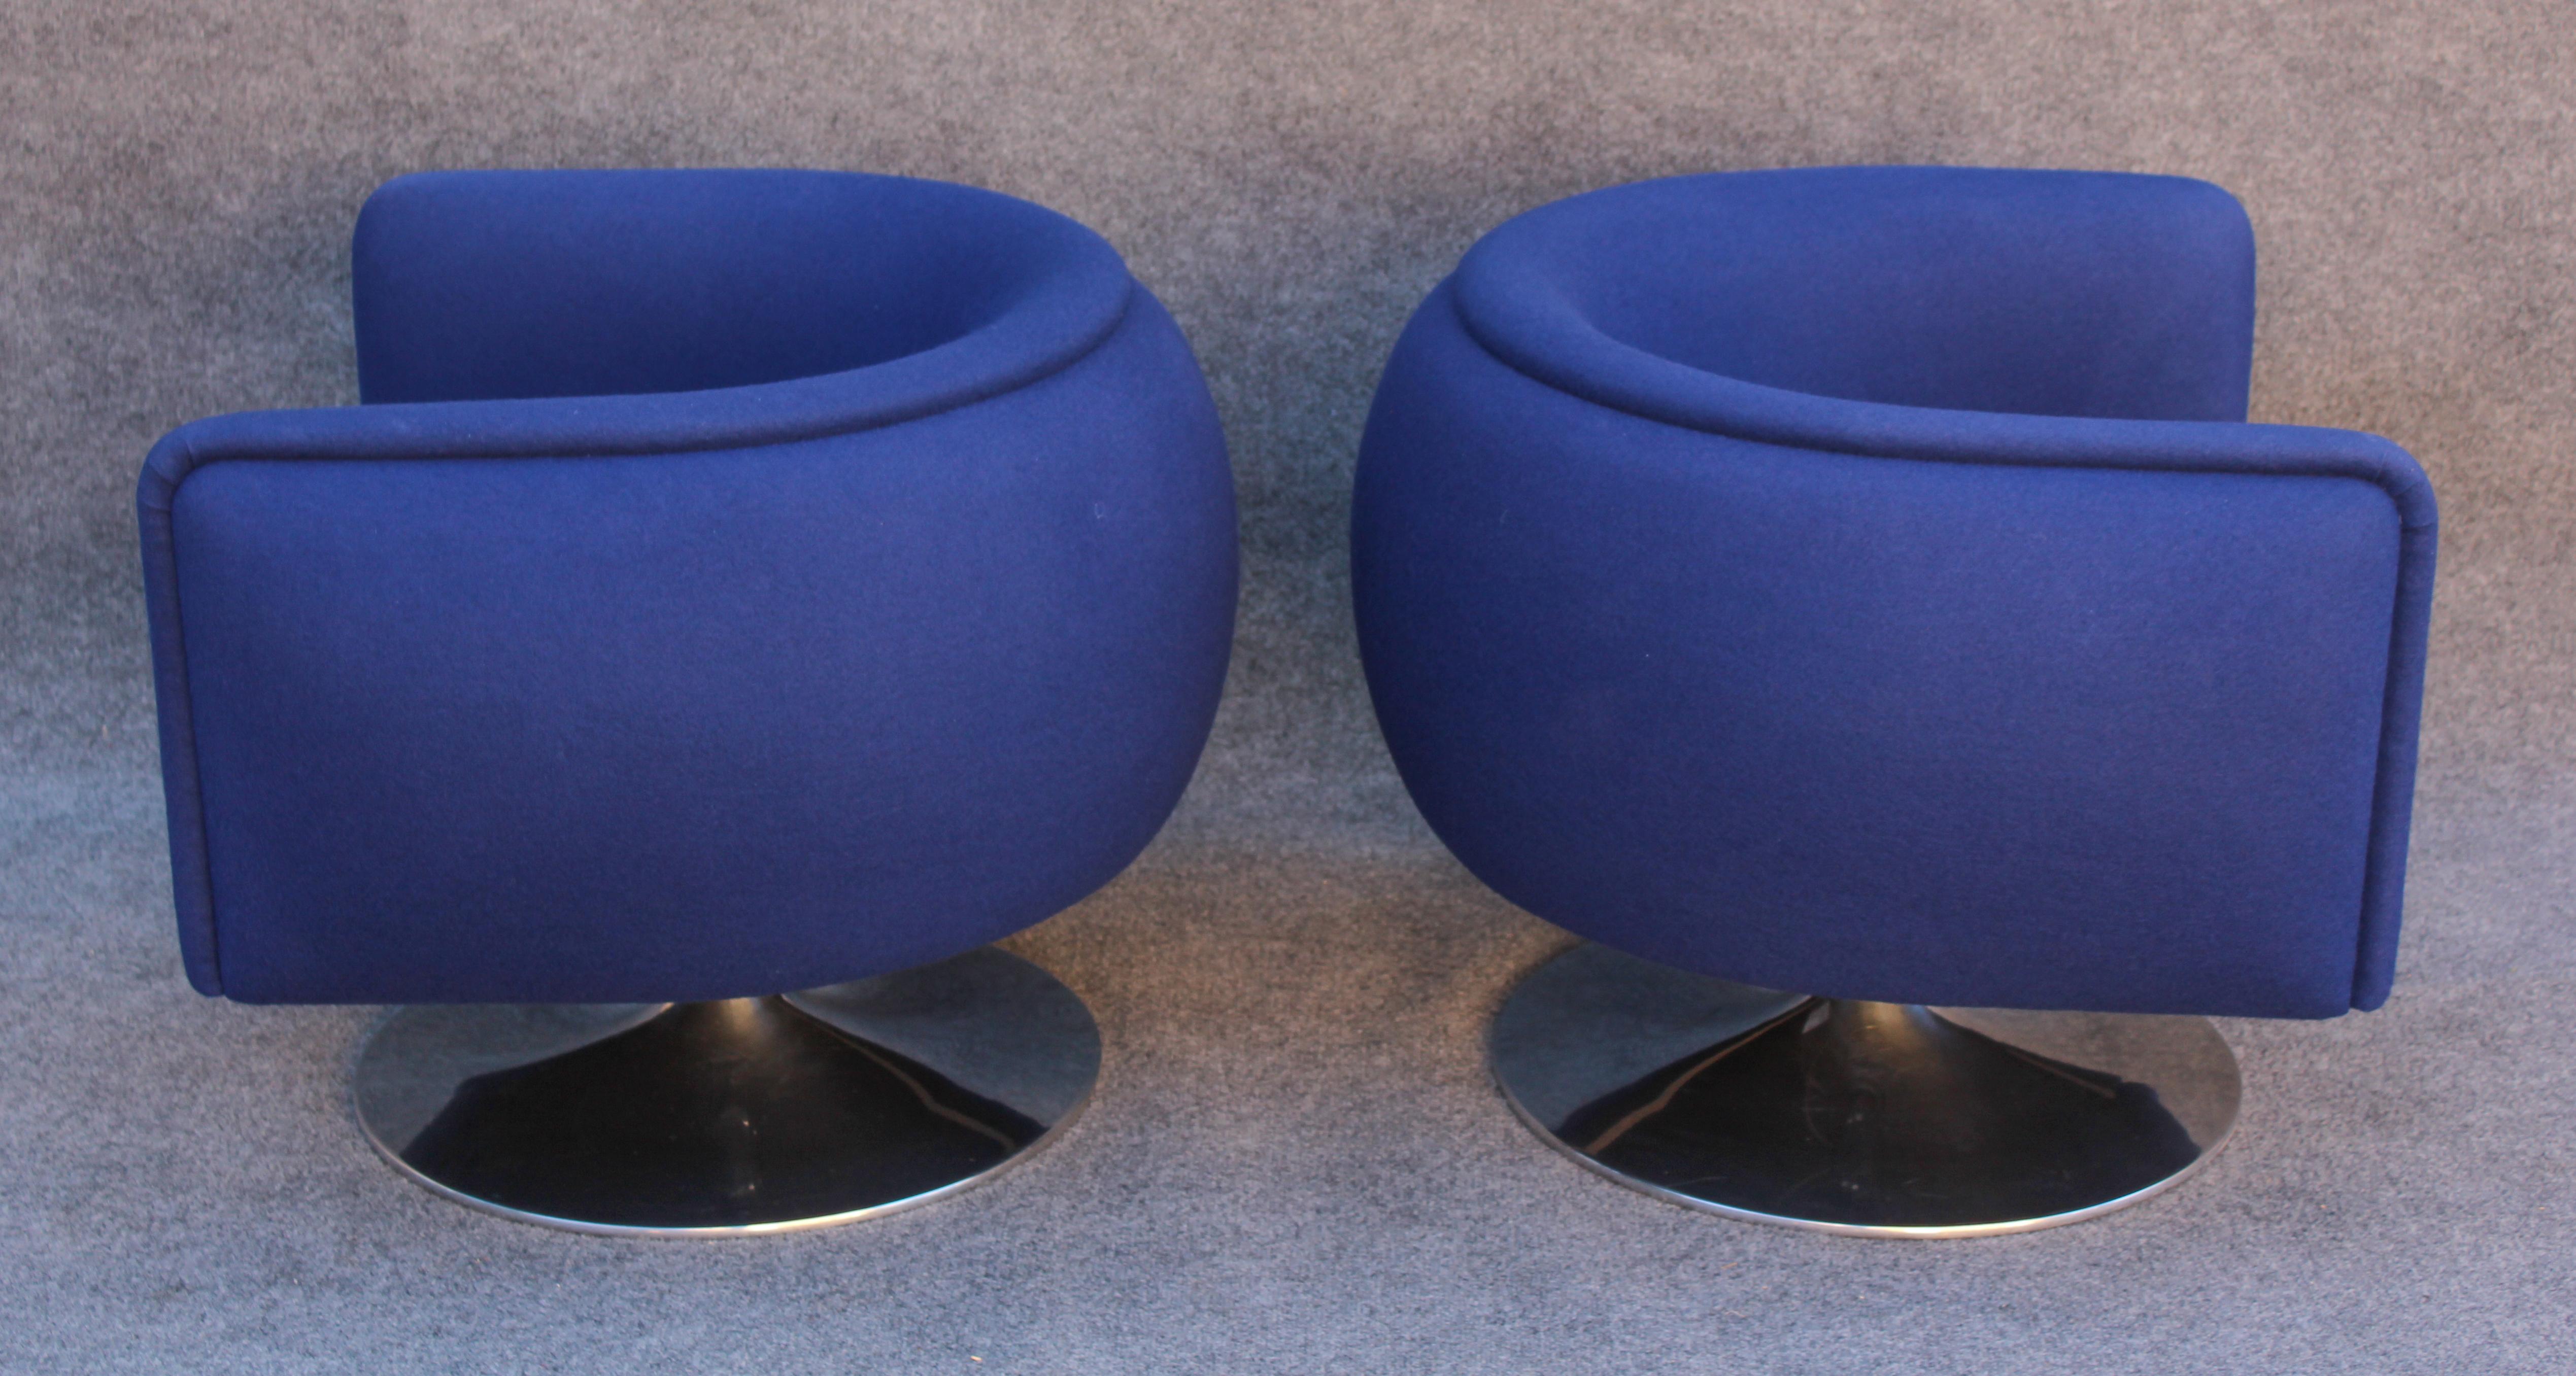 Joe D'Urso for Knoll Pair of Swivel Club Lounge Chairs in Deep Blue Wool Blend In Good Condition For Sale In Philadelphia, PA